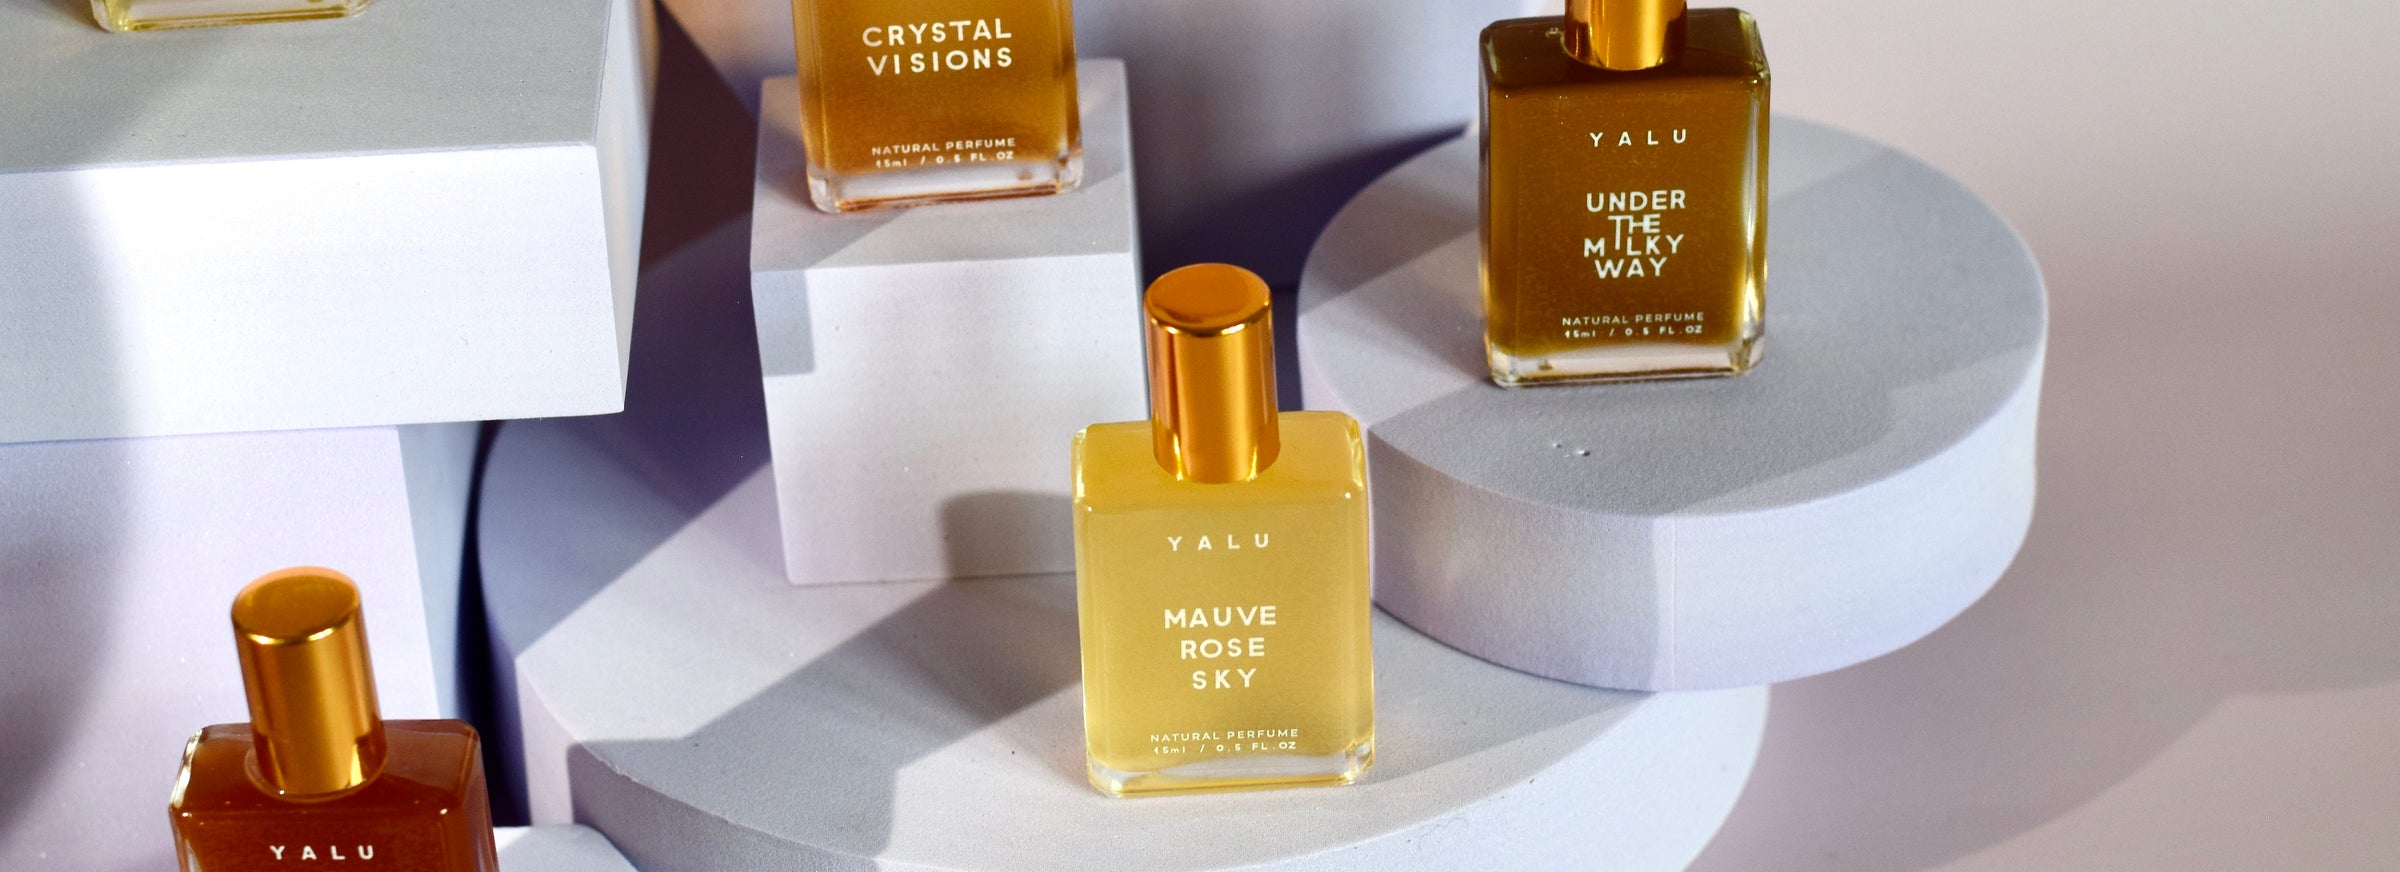 Lovingly handcrafted natural perfumes. Yalu Natural Perfume official stockist in Melbourne, Australia.